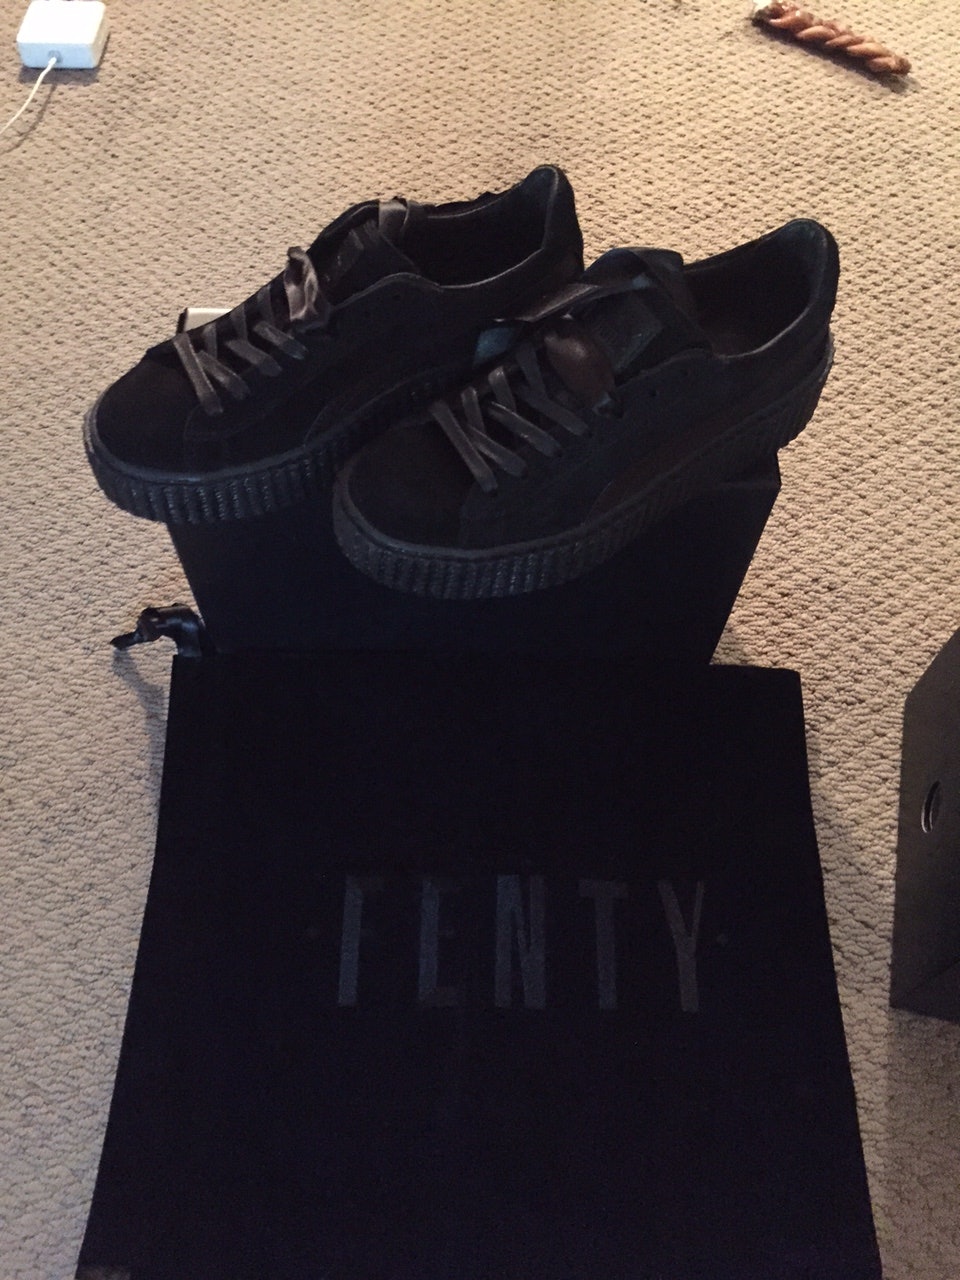 puma creepers review